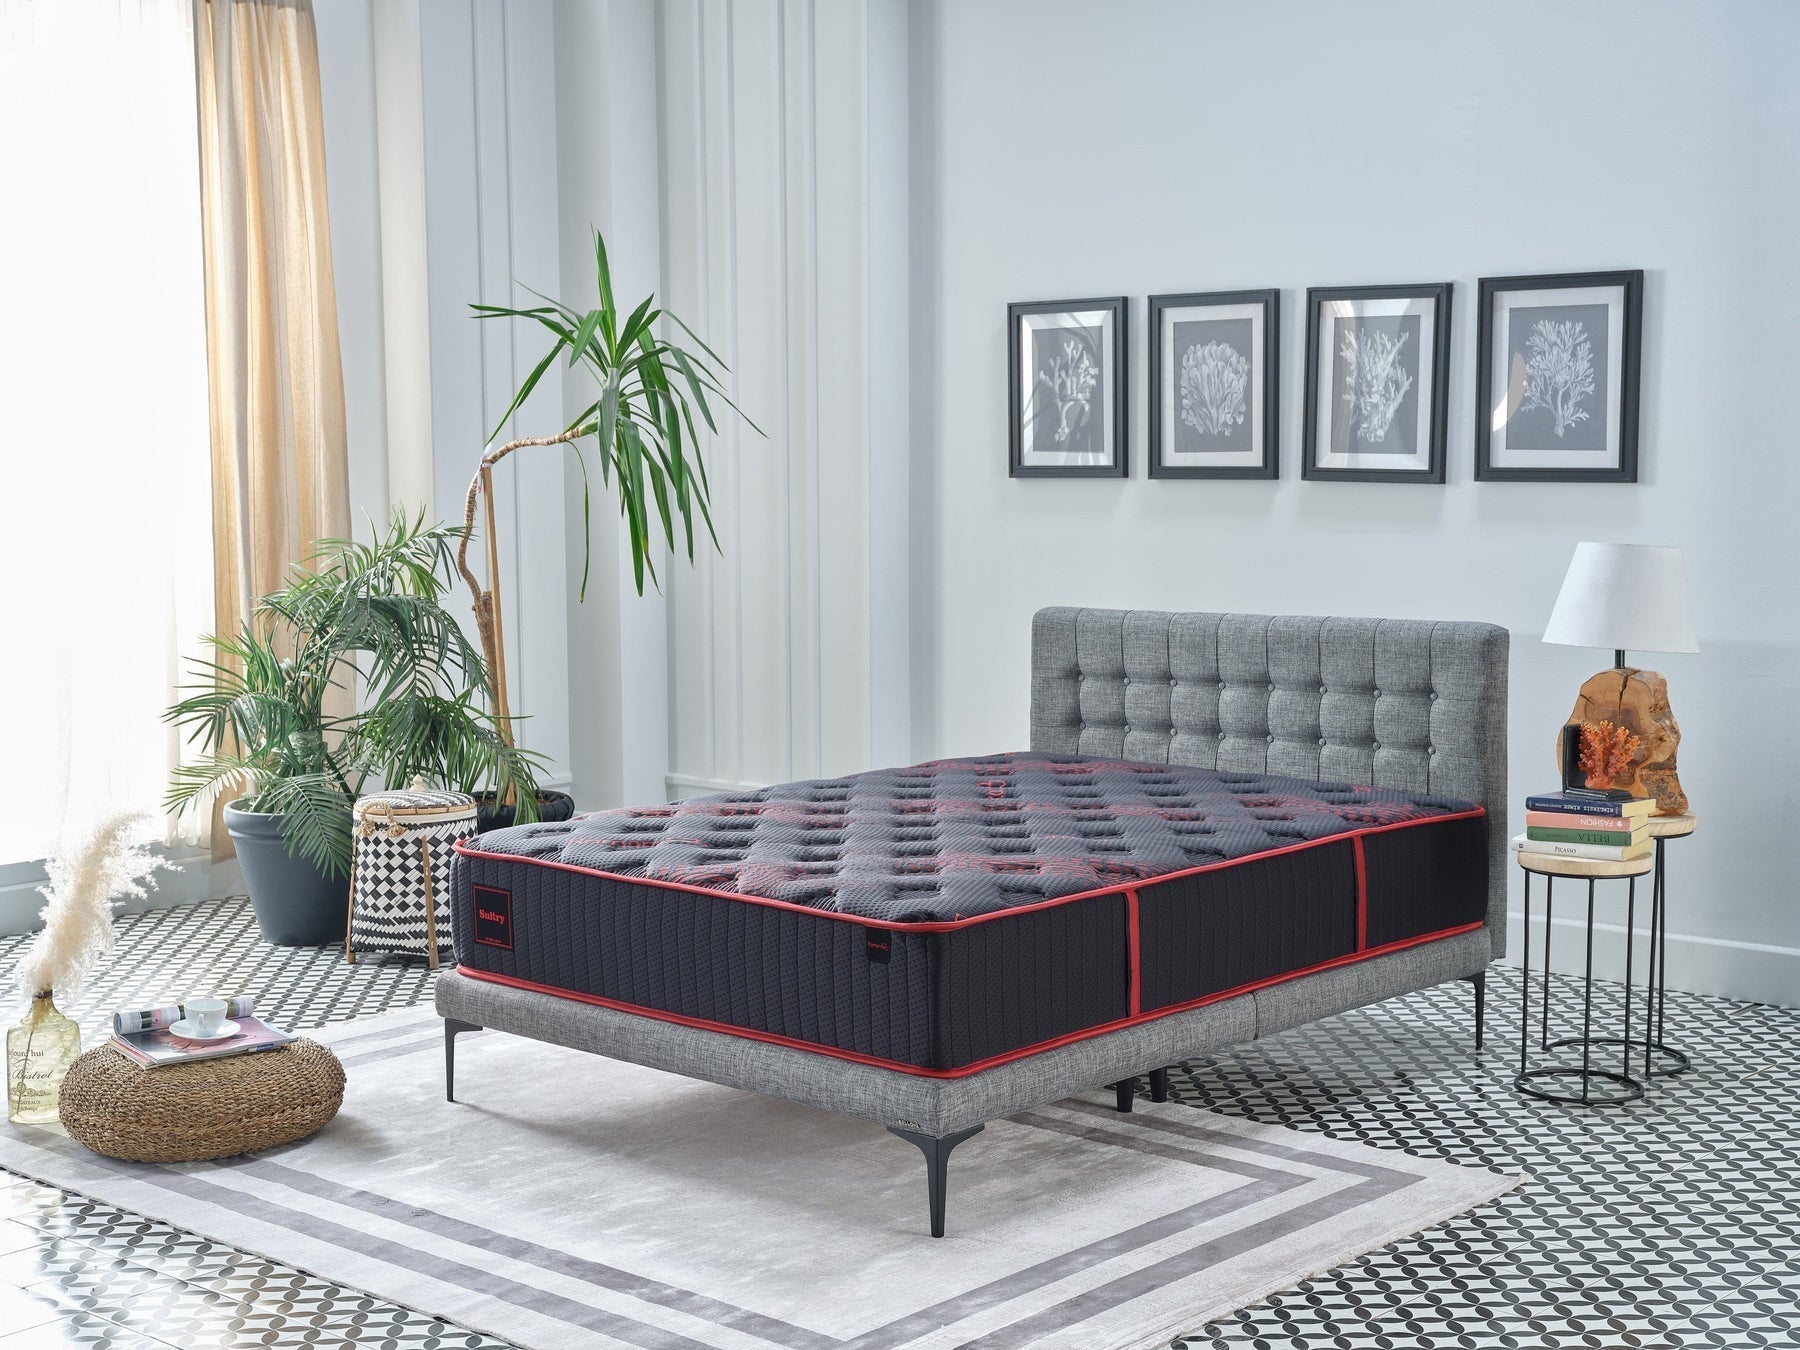 Sultry Mattress by Bellona